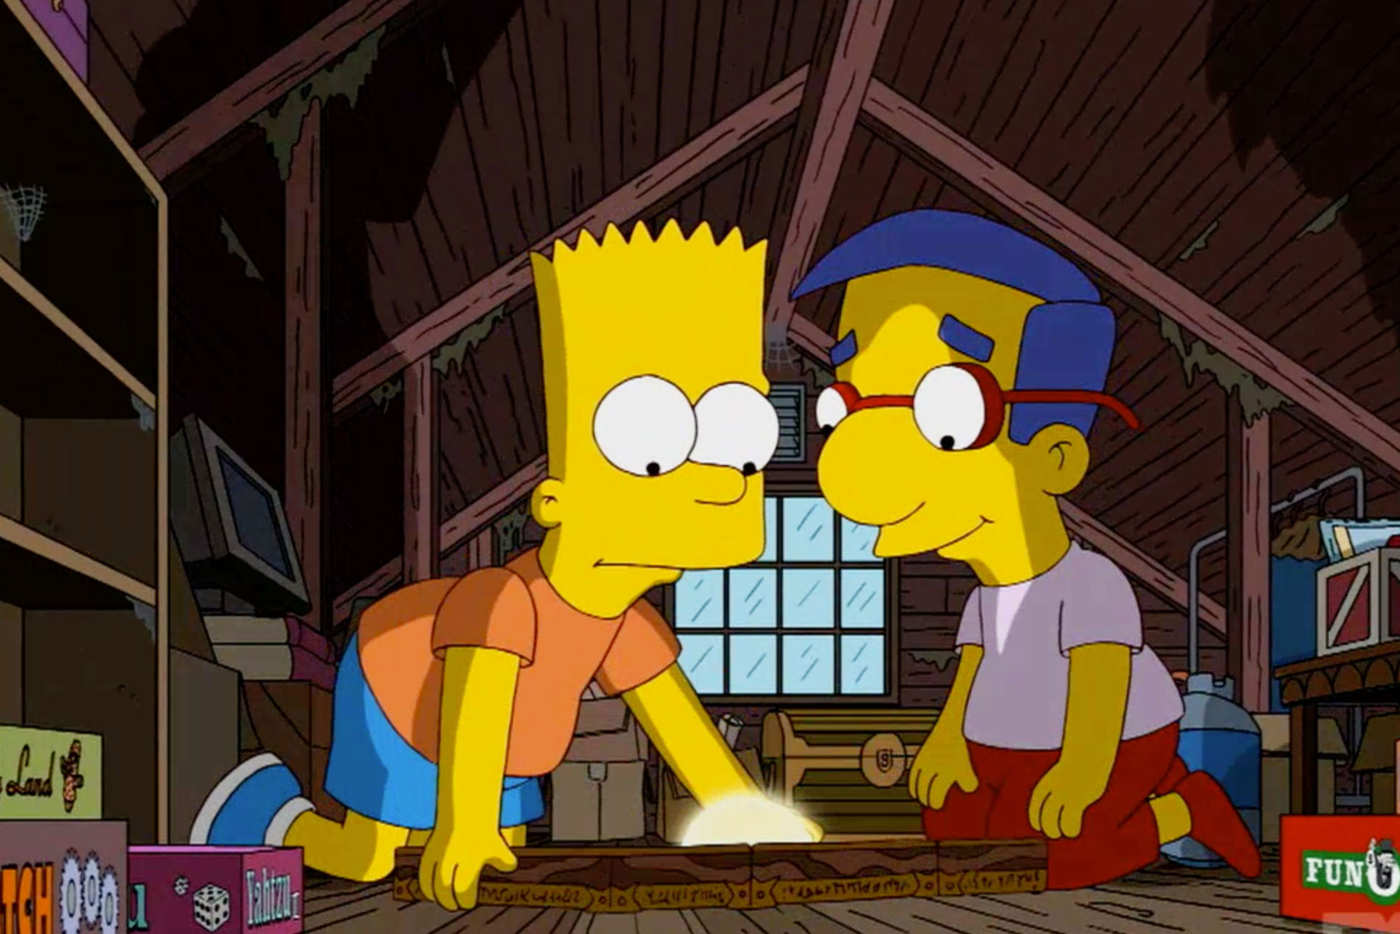 Cannibal Simpsons Porn - Every 'Simpsons' Treehouse of Horror Episode Segment, Ranked